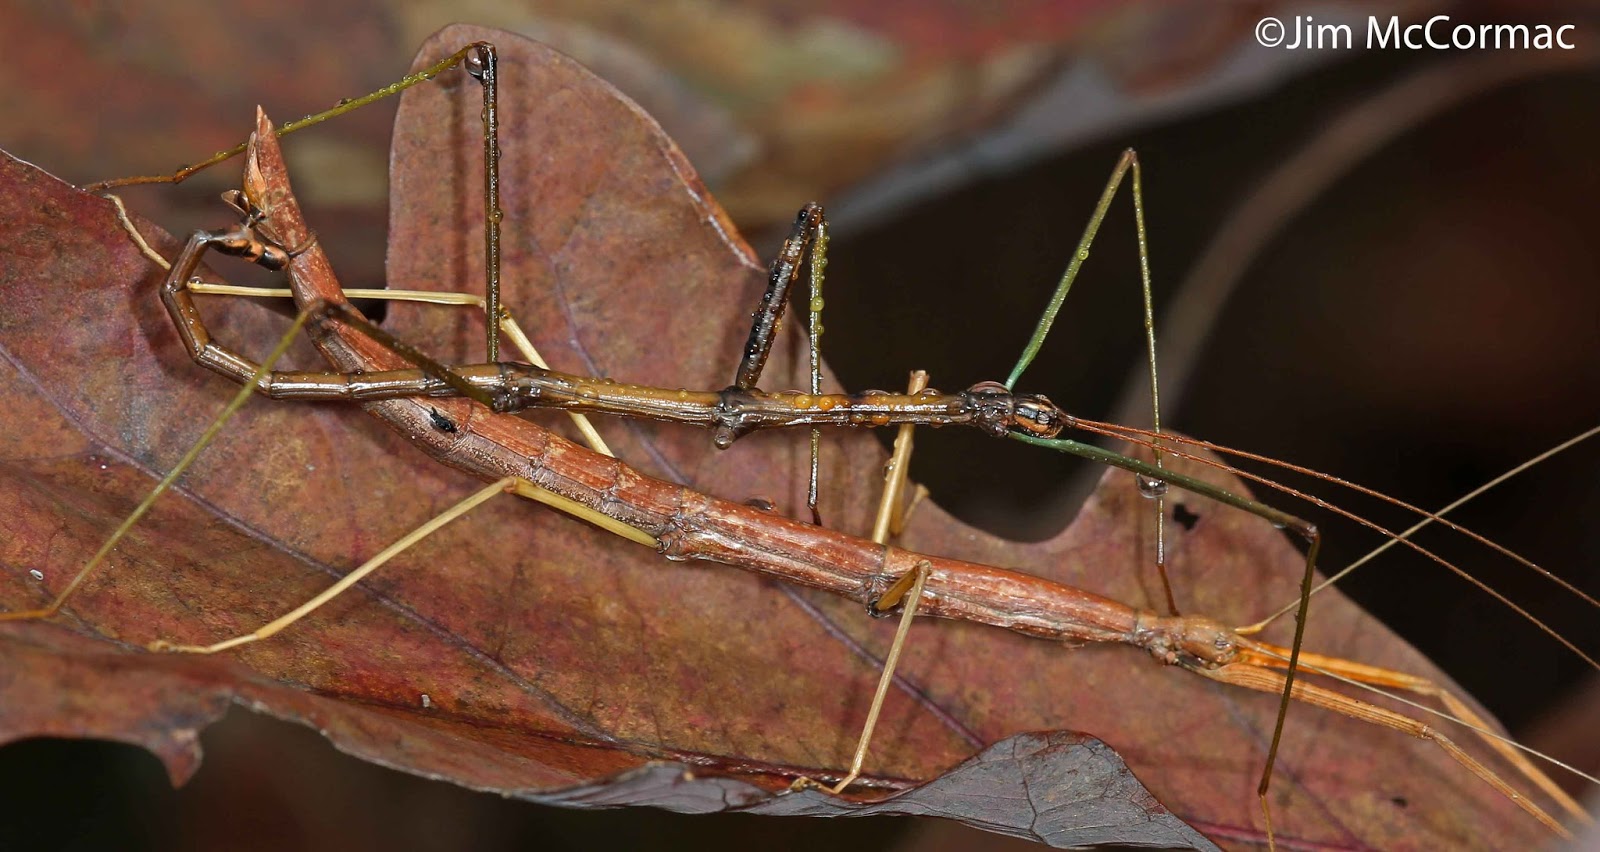 Ohio Birds and Biodiversity: Walkingsticks blend so well, they're easy to  miss